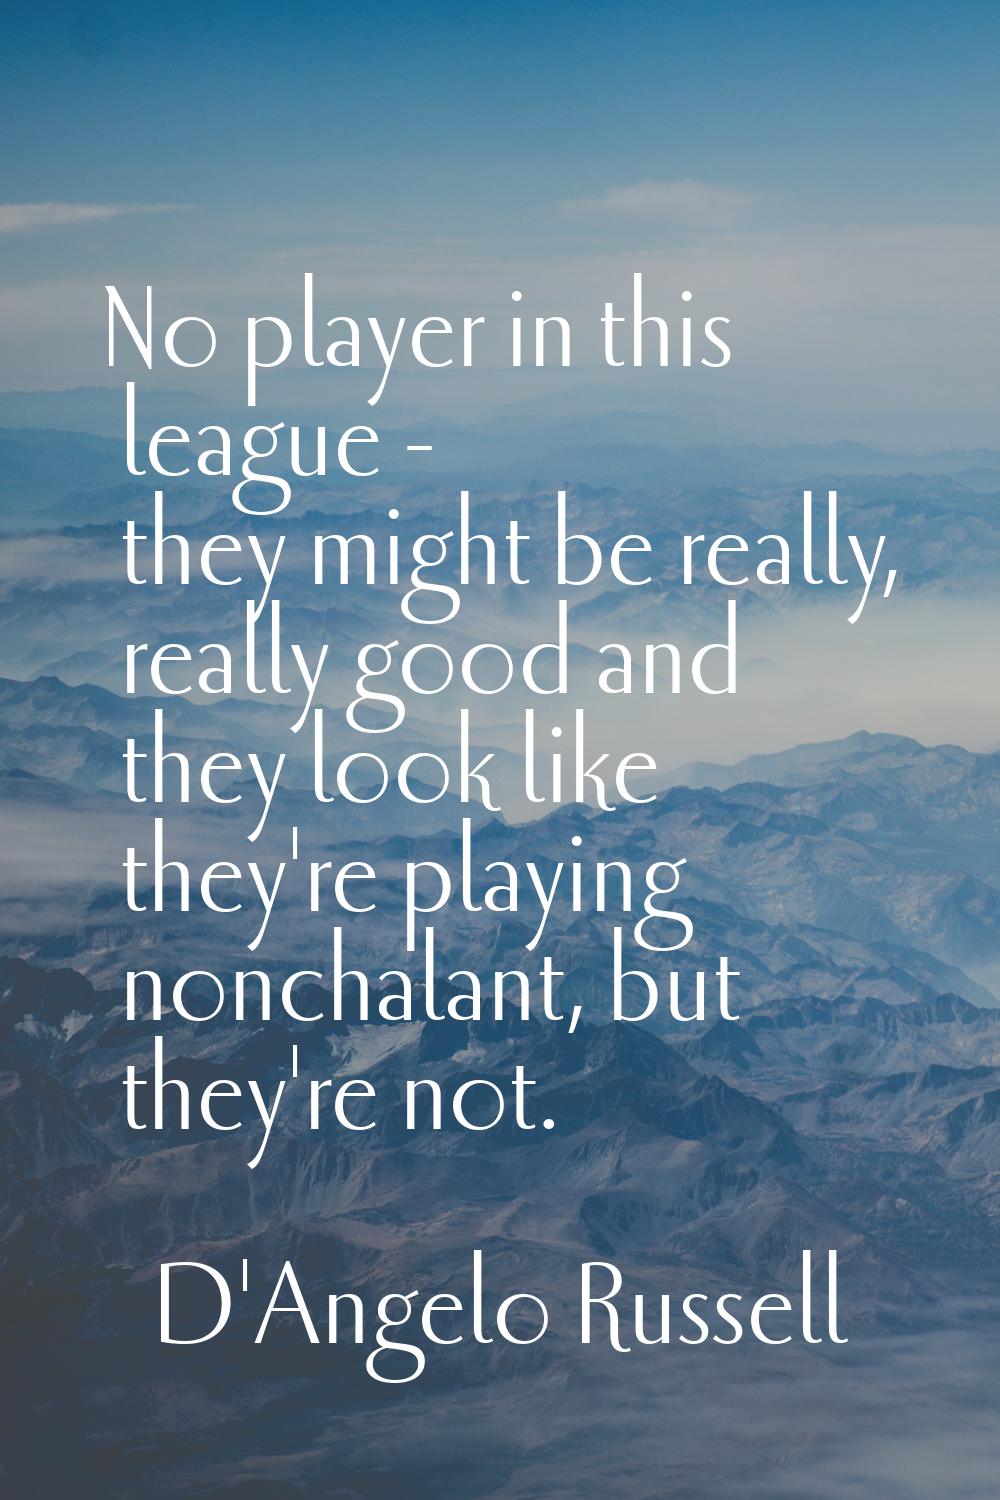 No player in this league - they might be really, really good and they look like they're playing non